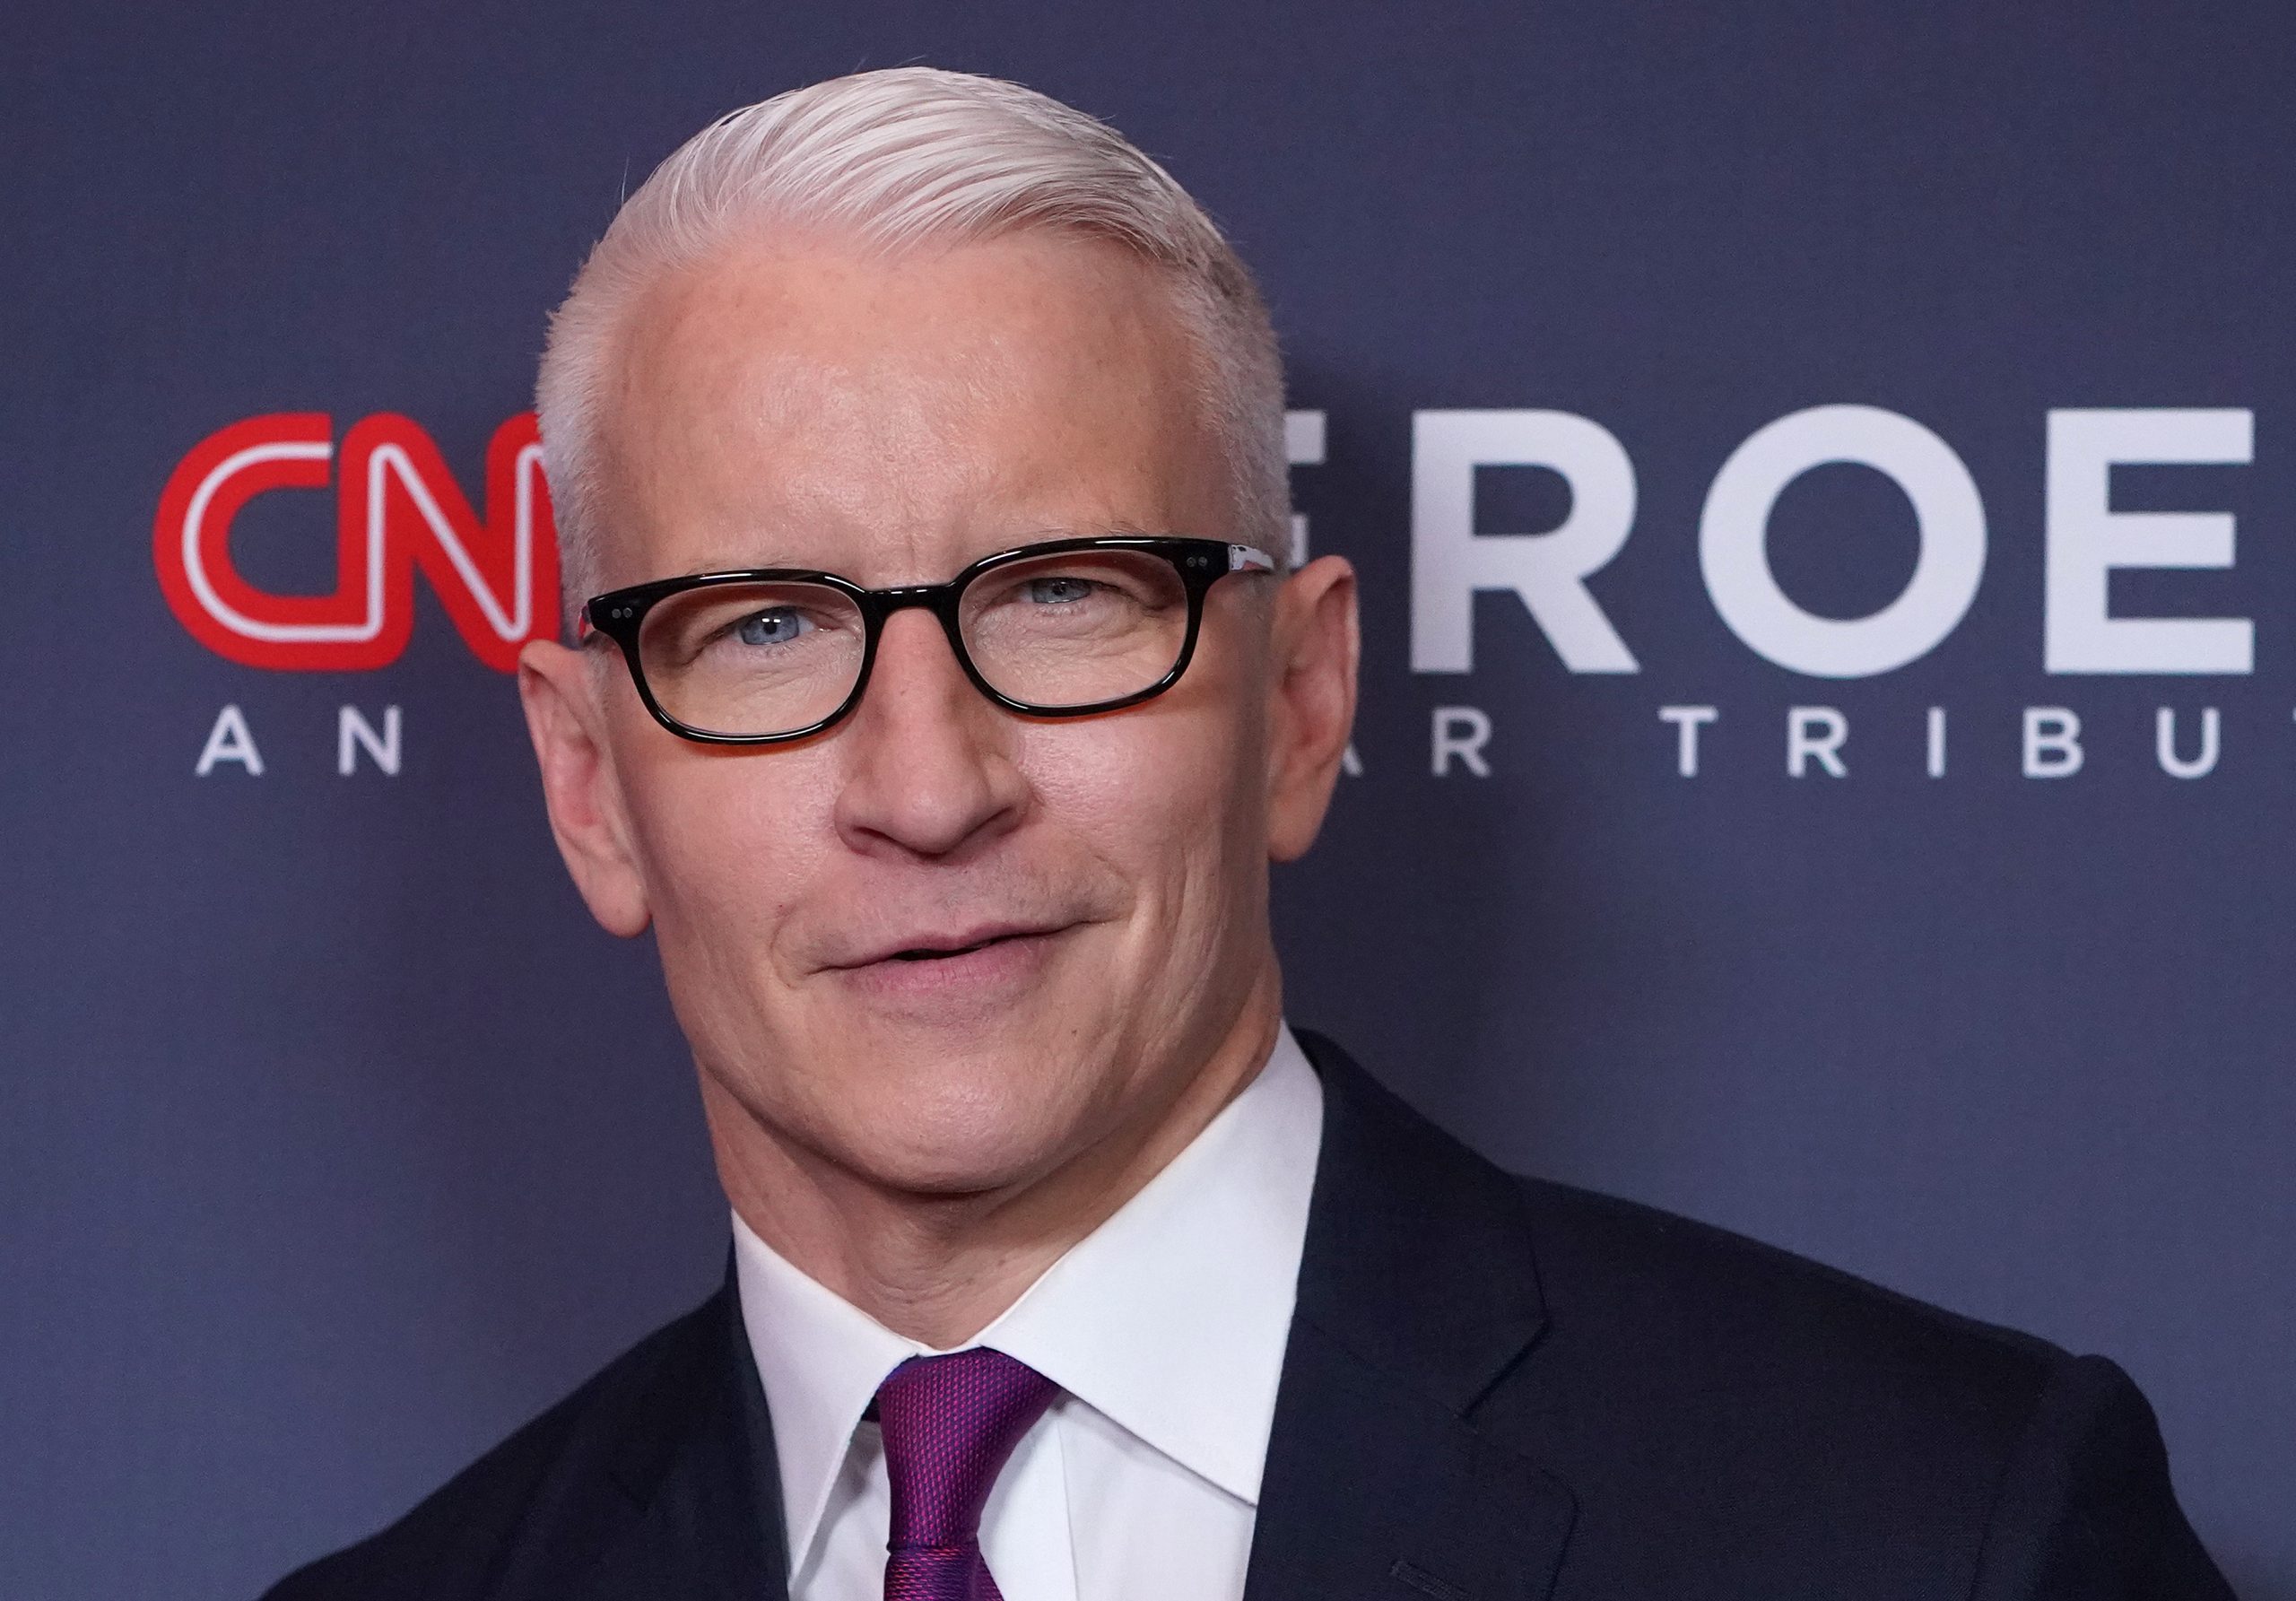 Anderson Cooper Shares Magazine Cover With Son Wyatt and Fans Can’t With the Cuteness Overload